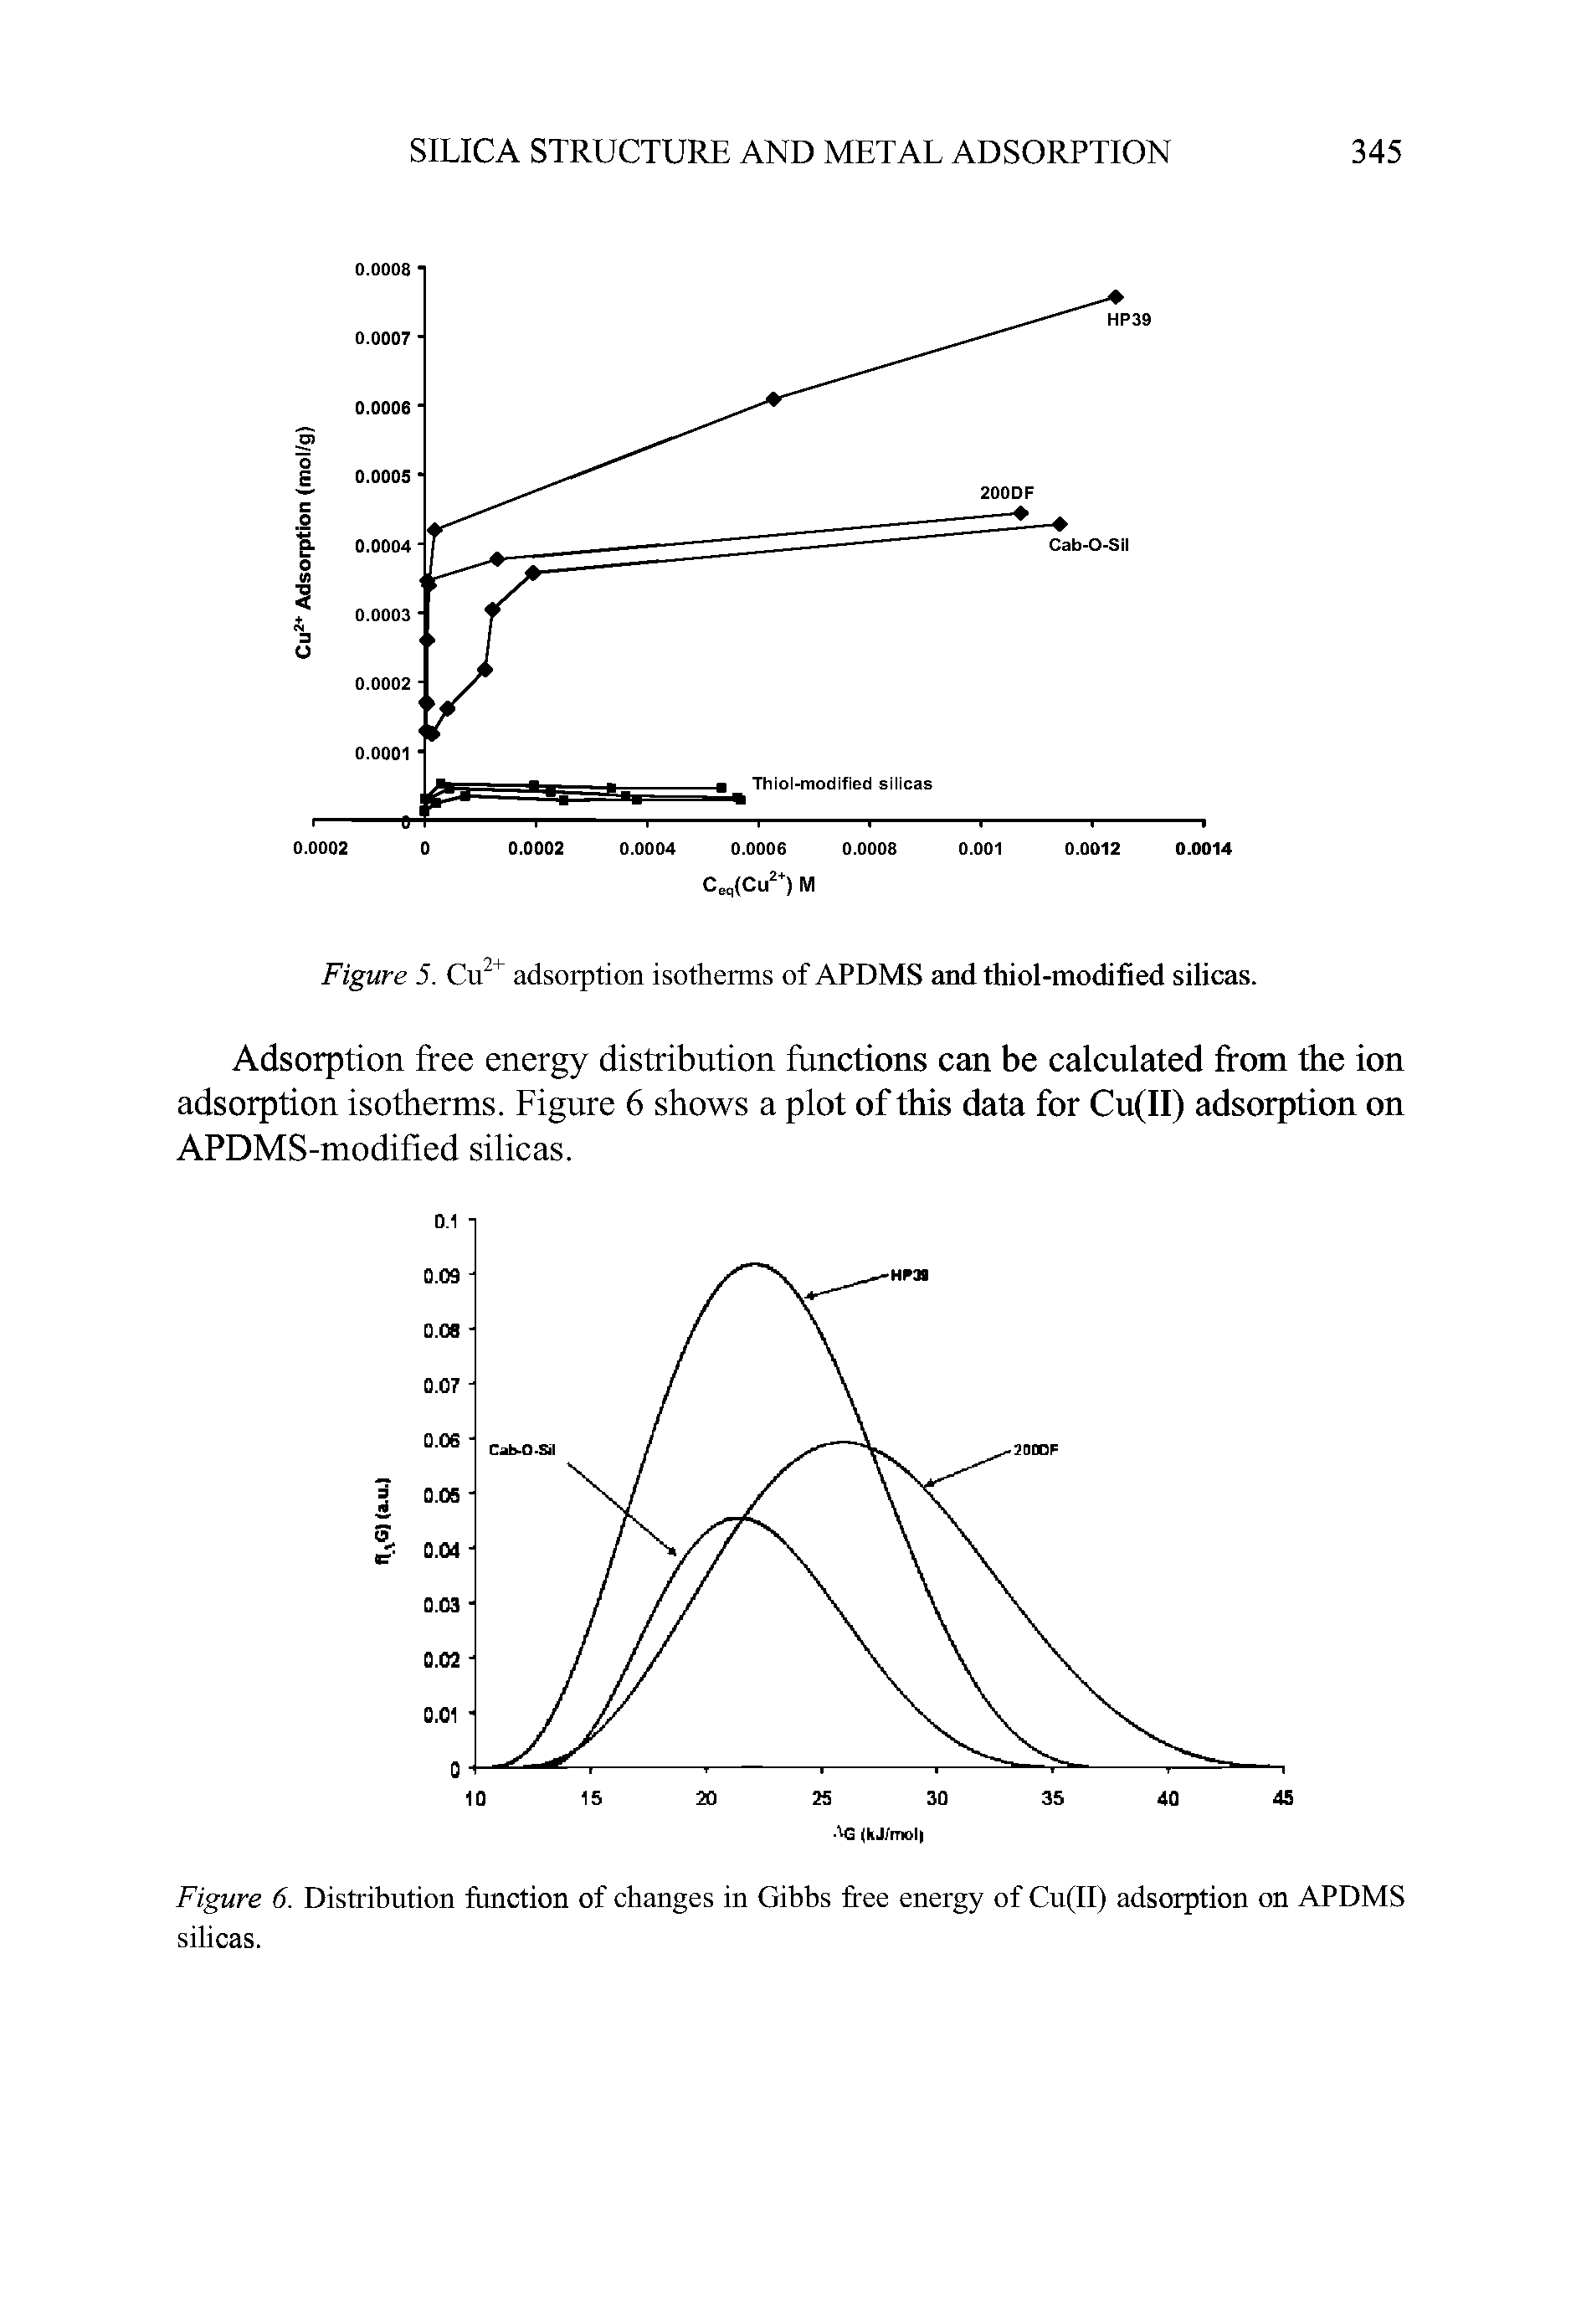 Figure 6. Distribution function of changes in Gibbs free energy of Cu(II) adsorption on APDMS silicas.